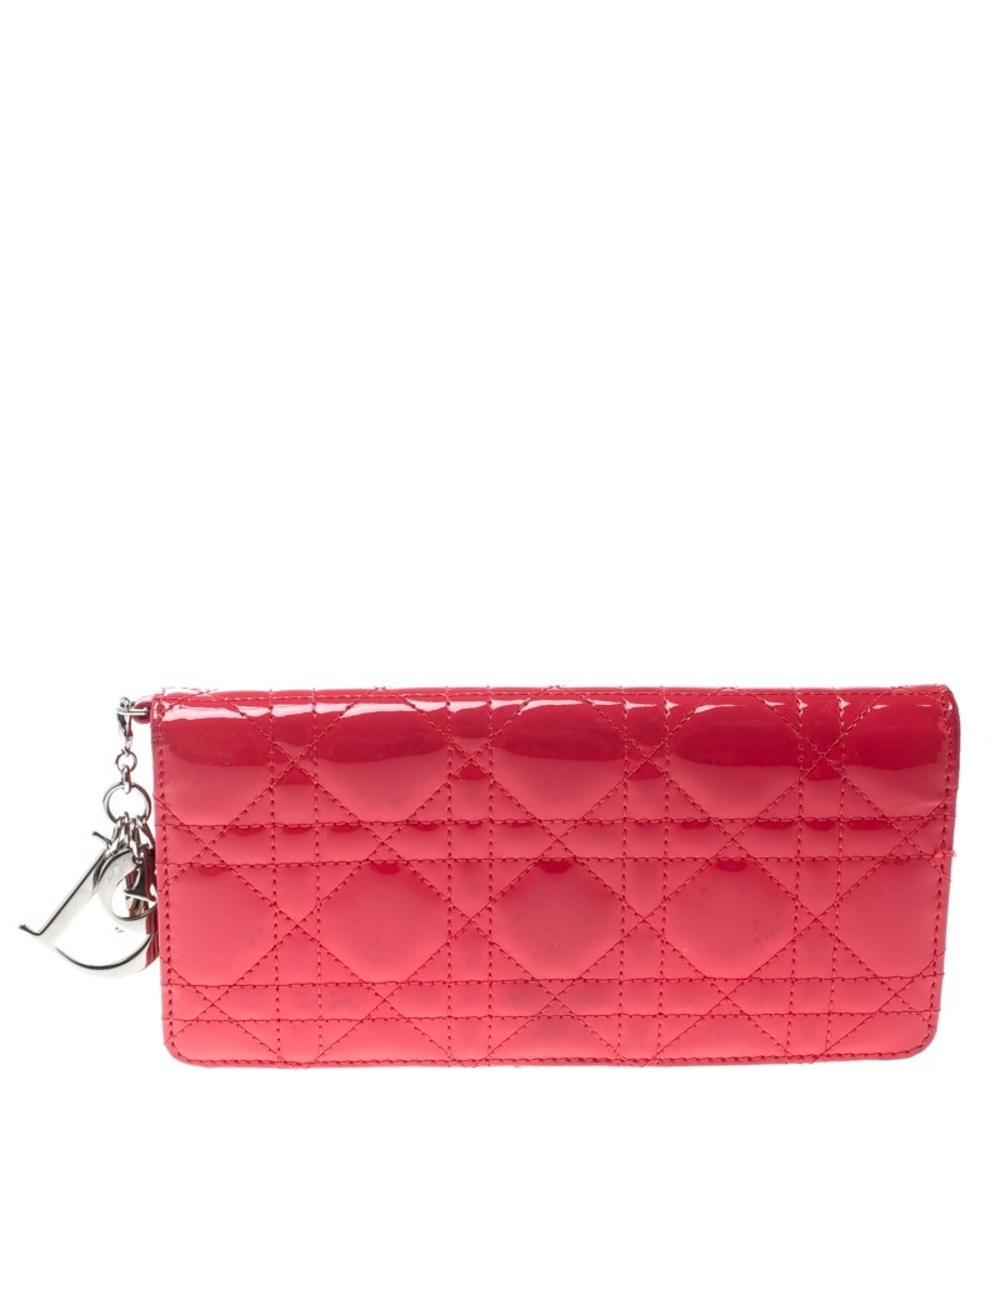 Fuchsia looks beautiful on this Christian Dior Lady Dior wallet that has been crafted with cannage q